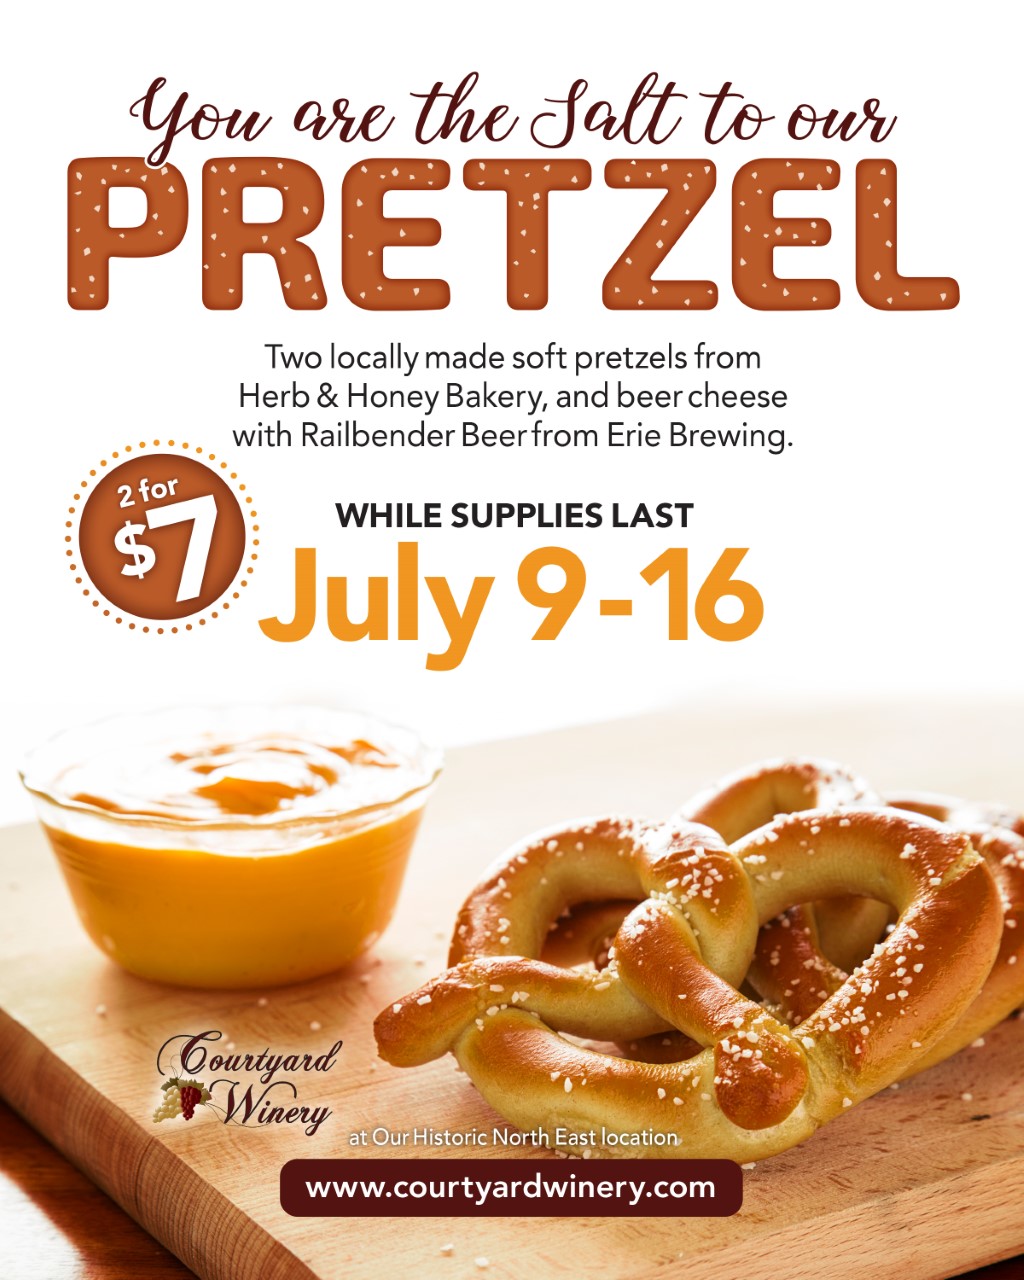 Courtyard Winery presents "You are the Salt to our Pretzel"